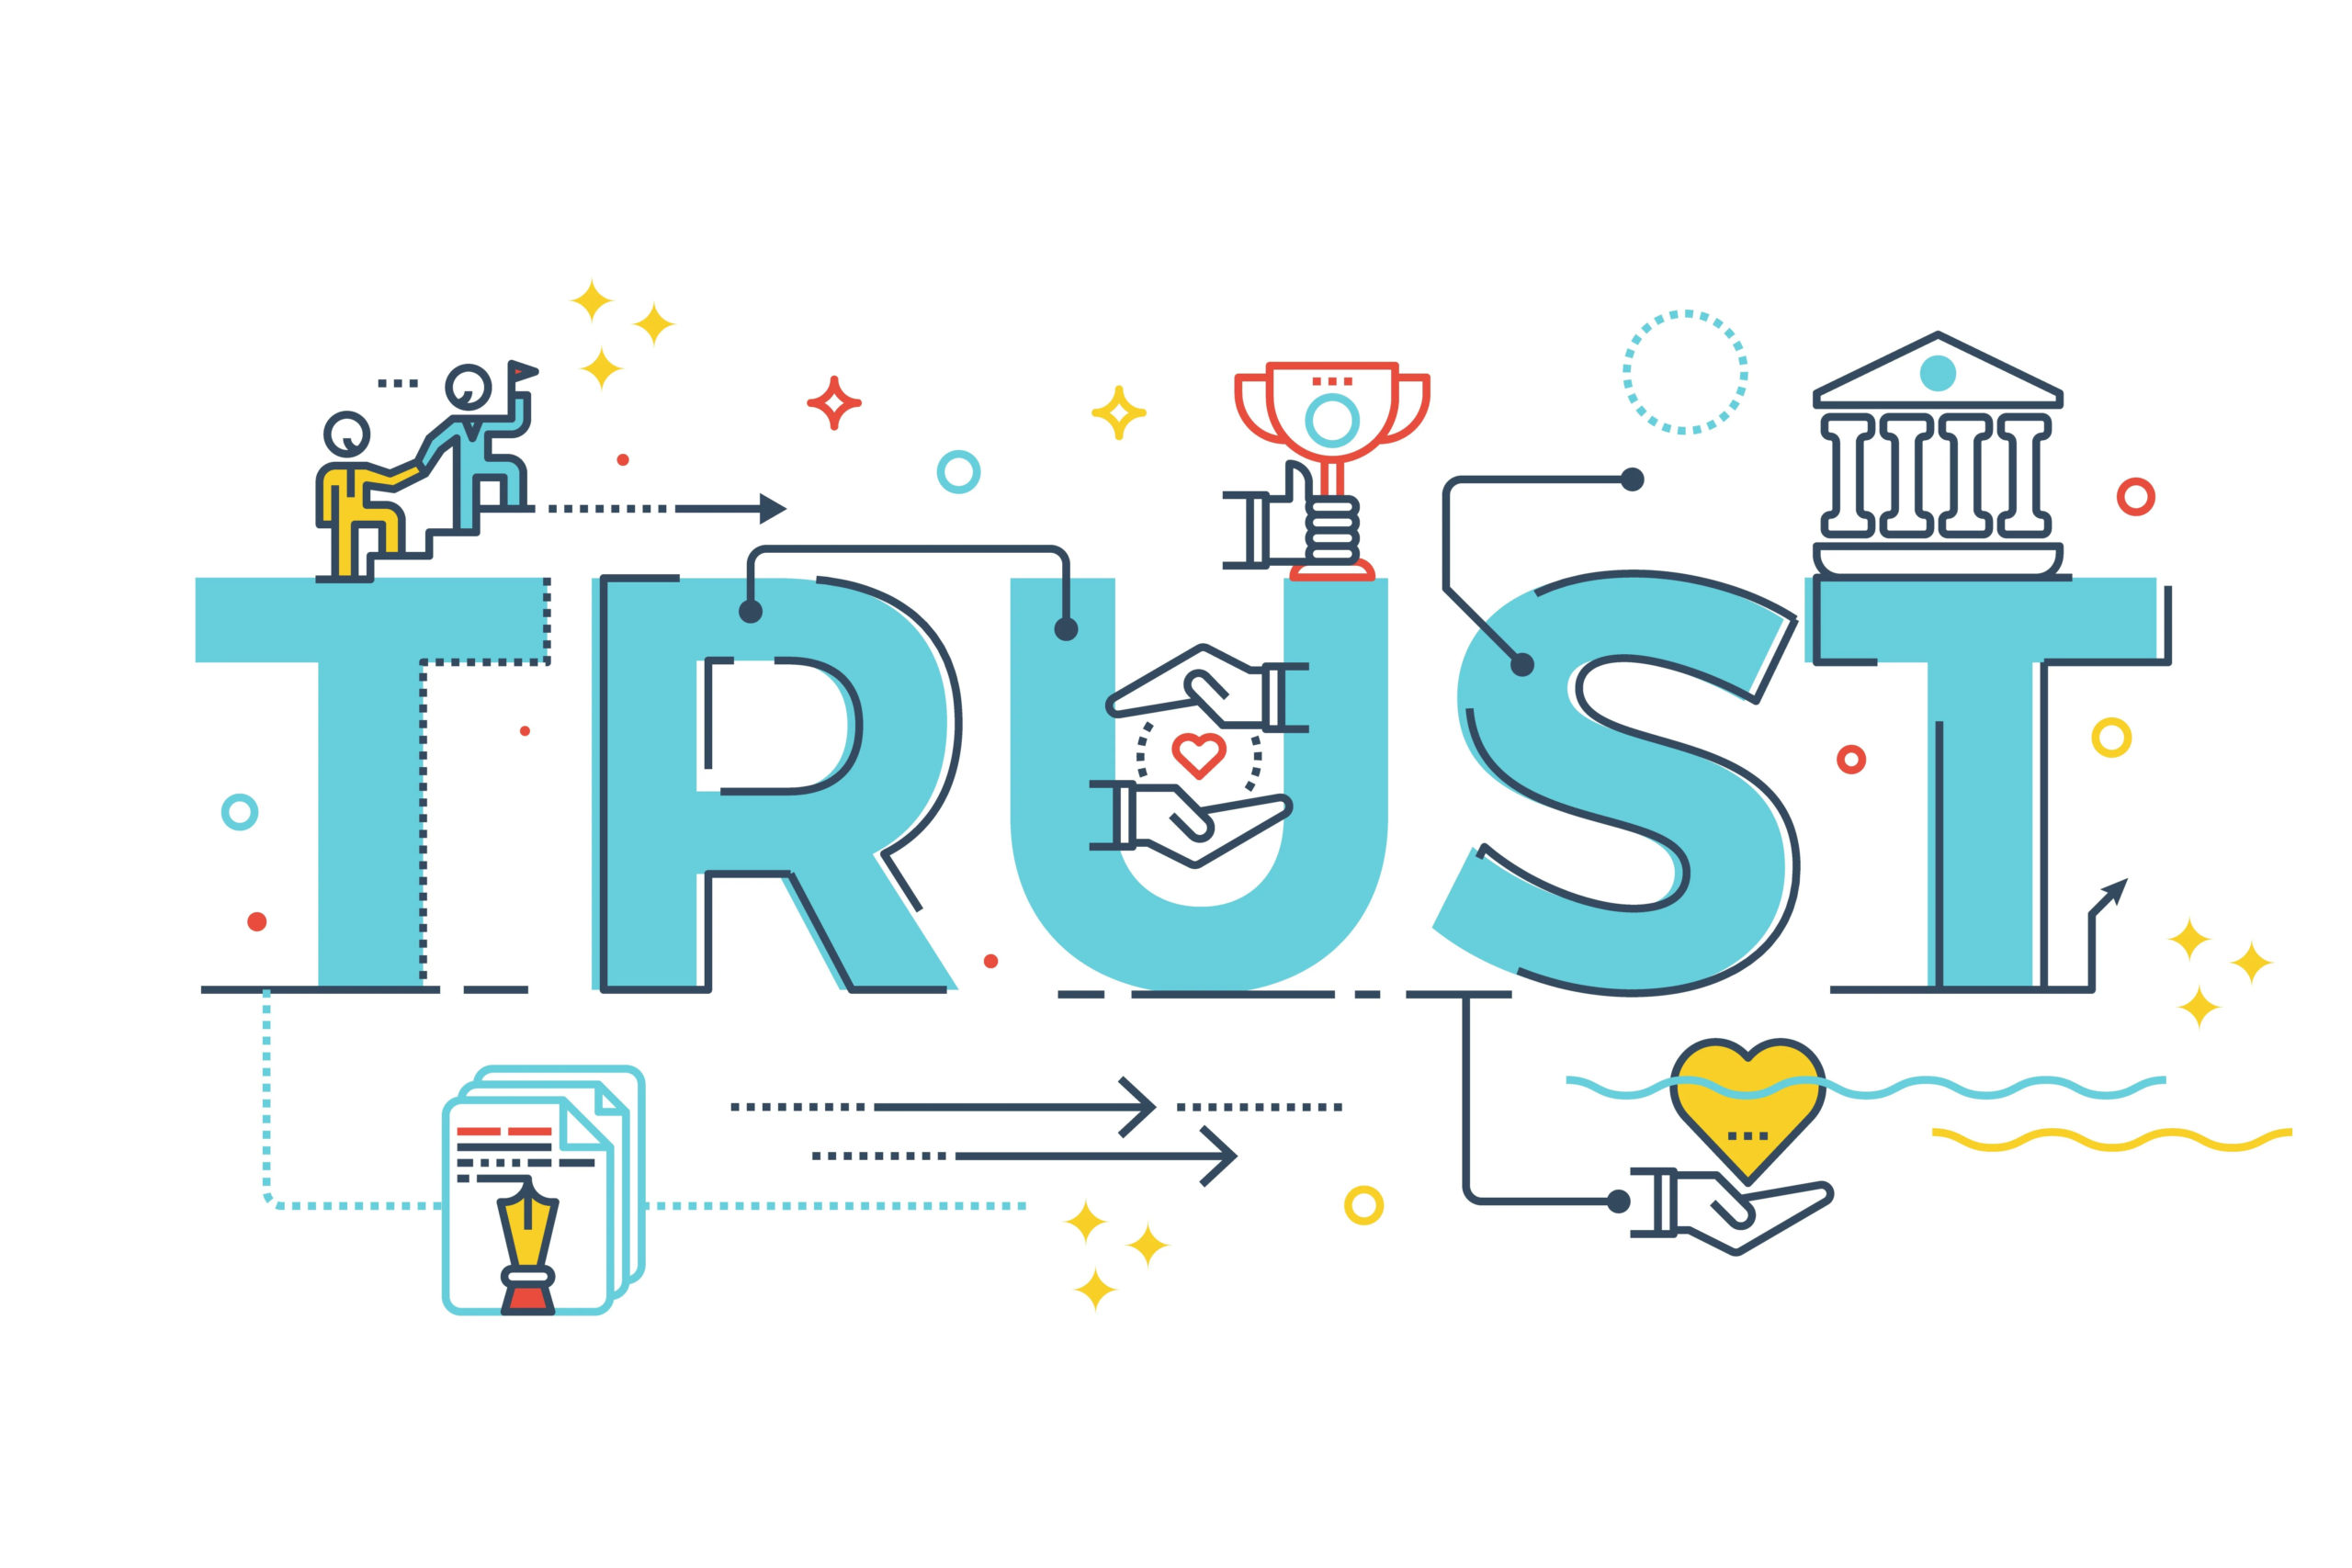 The 8 Steps You Can Take to Build a Culture of Trust in Your Organisation